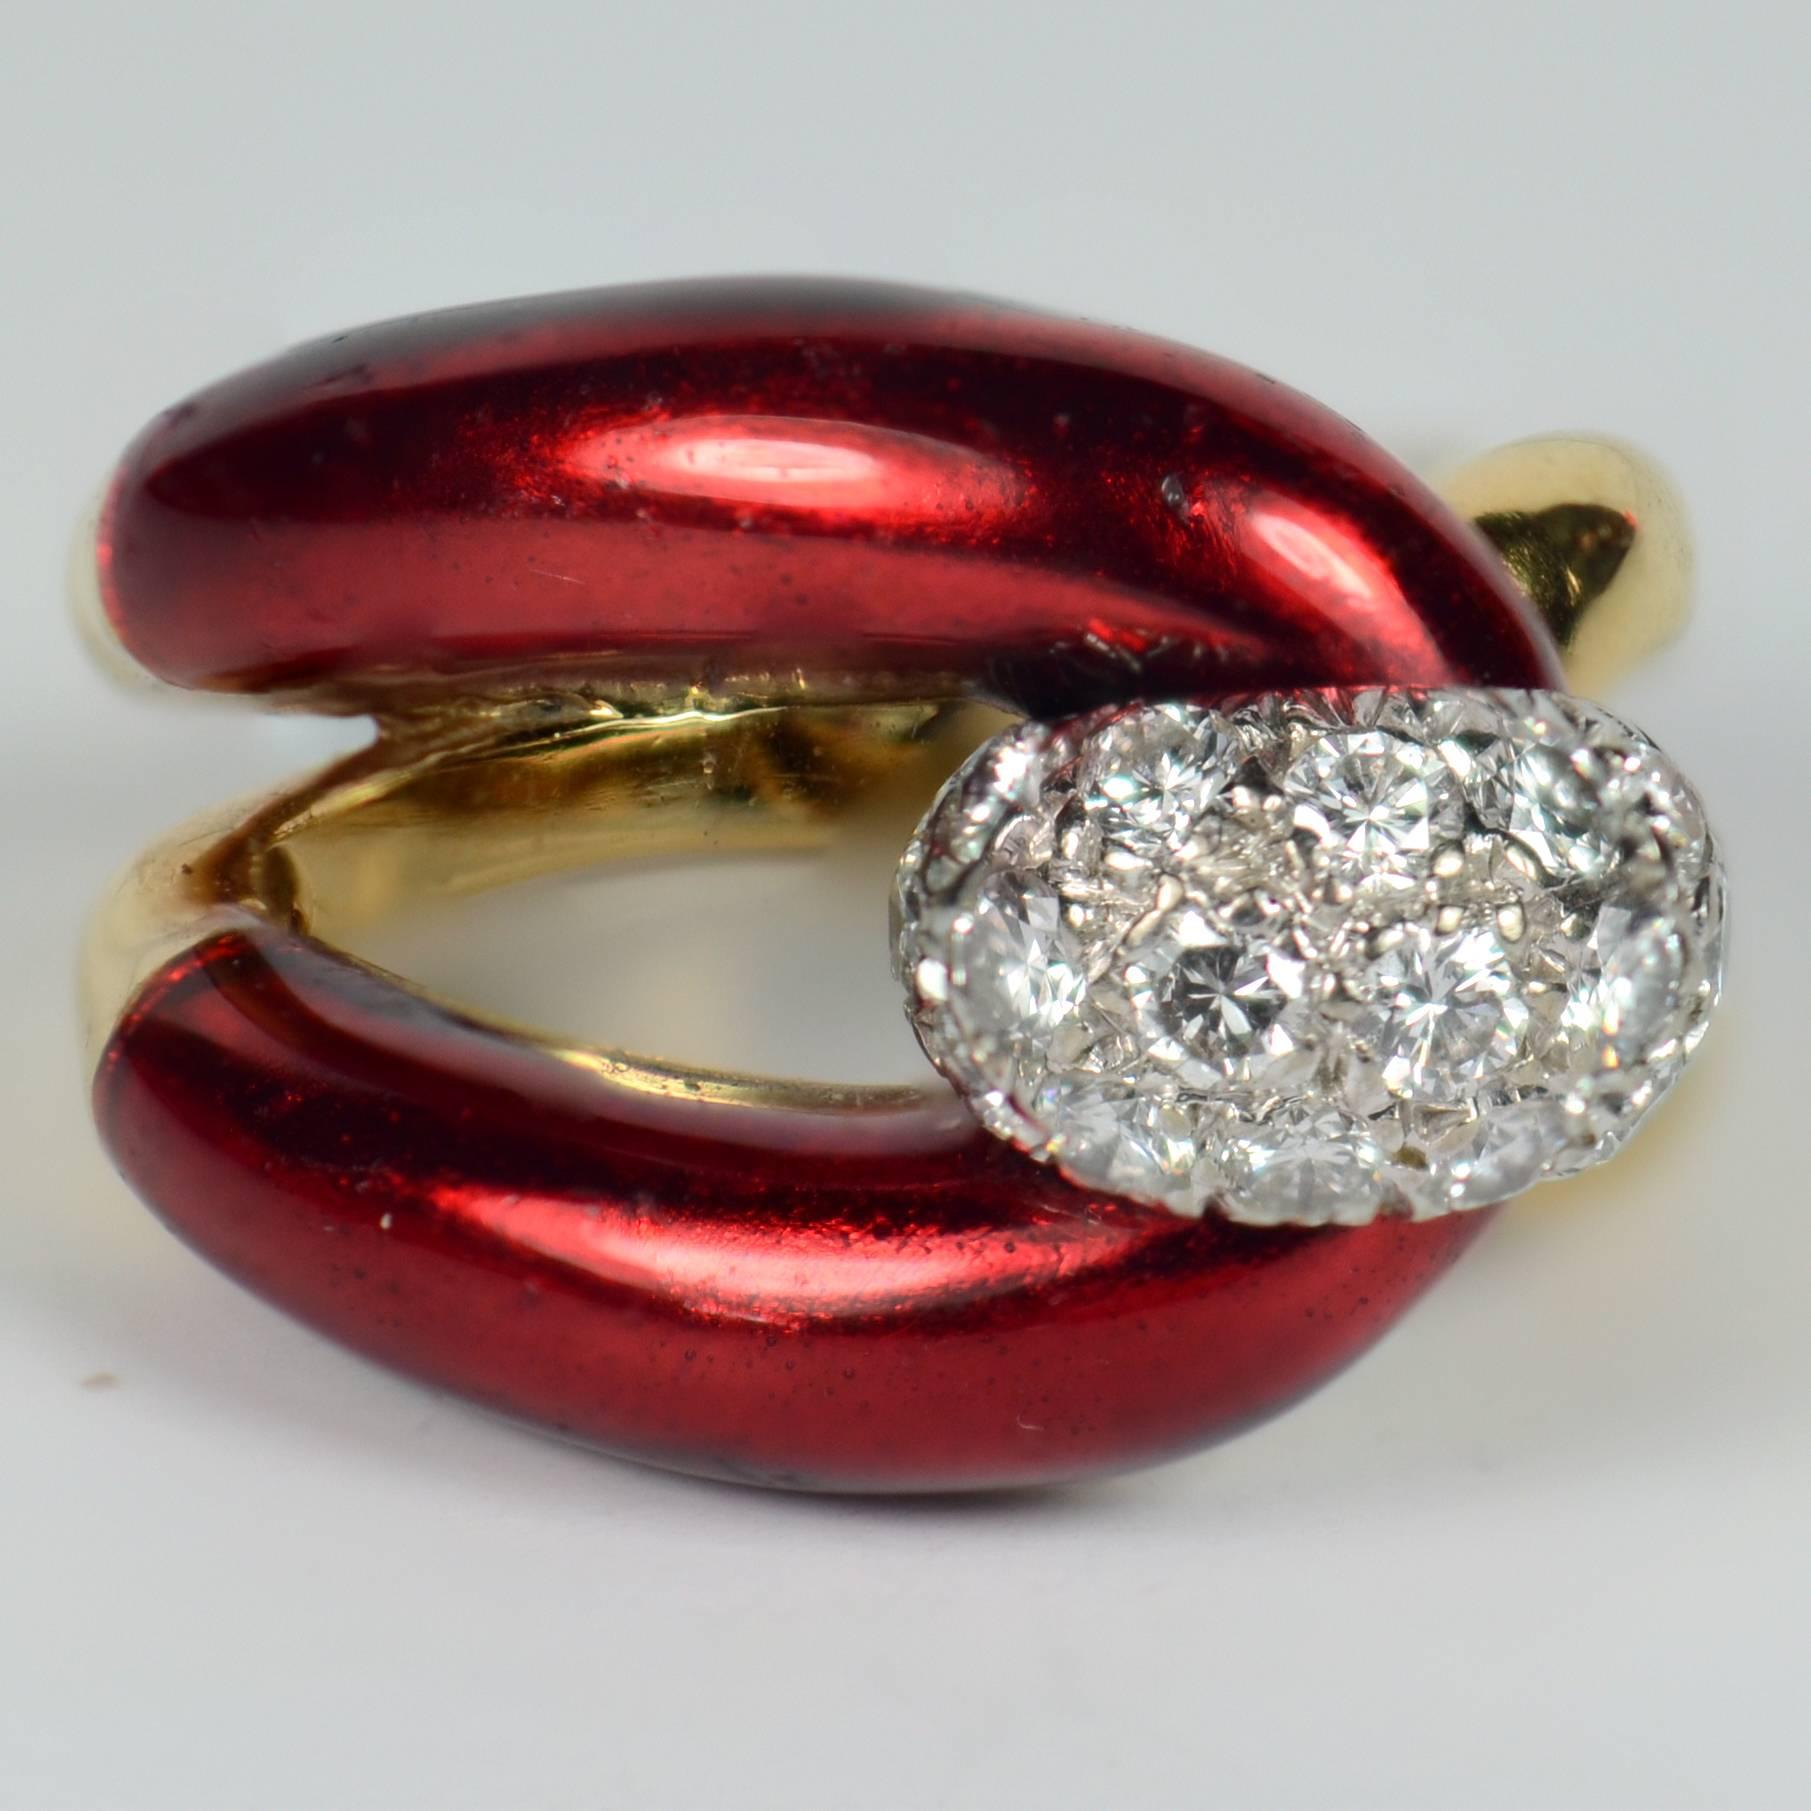 A very chic ring in 18 carat gold designed as a buckle, the uppermost part enamelled to a to a rich crimson. The bar of the buckle is represented by a diamond bombe finial in white gold pave-set with 16 round brilliant diamonds with a total